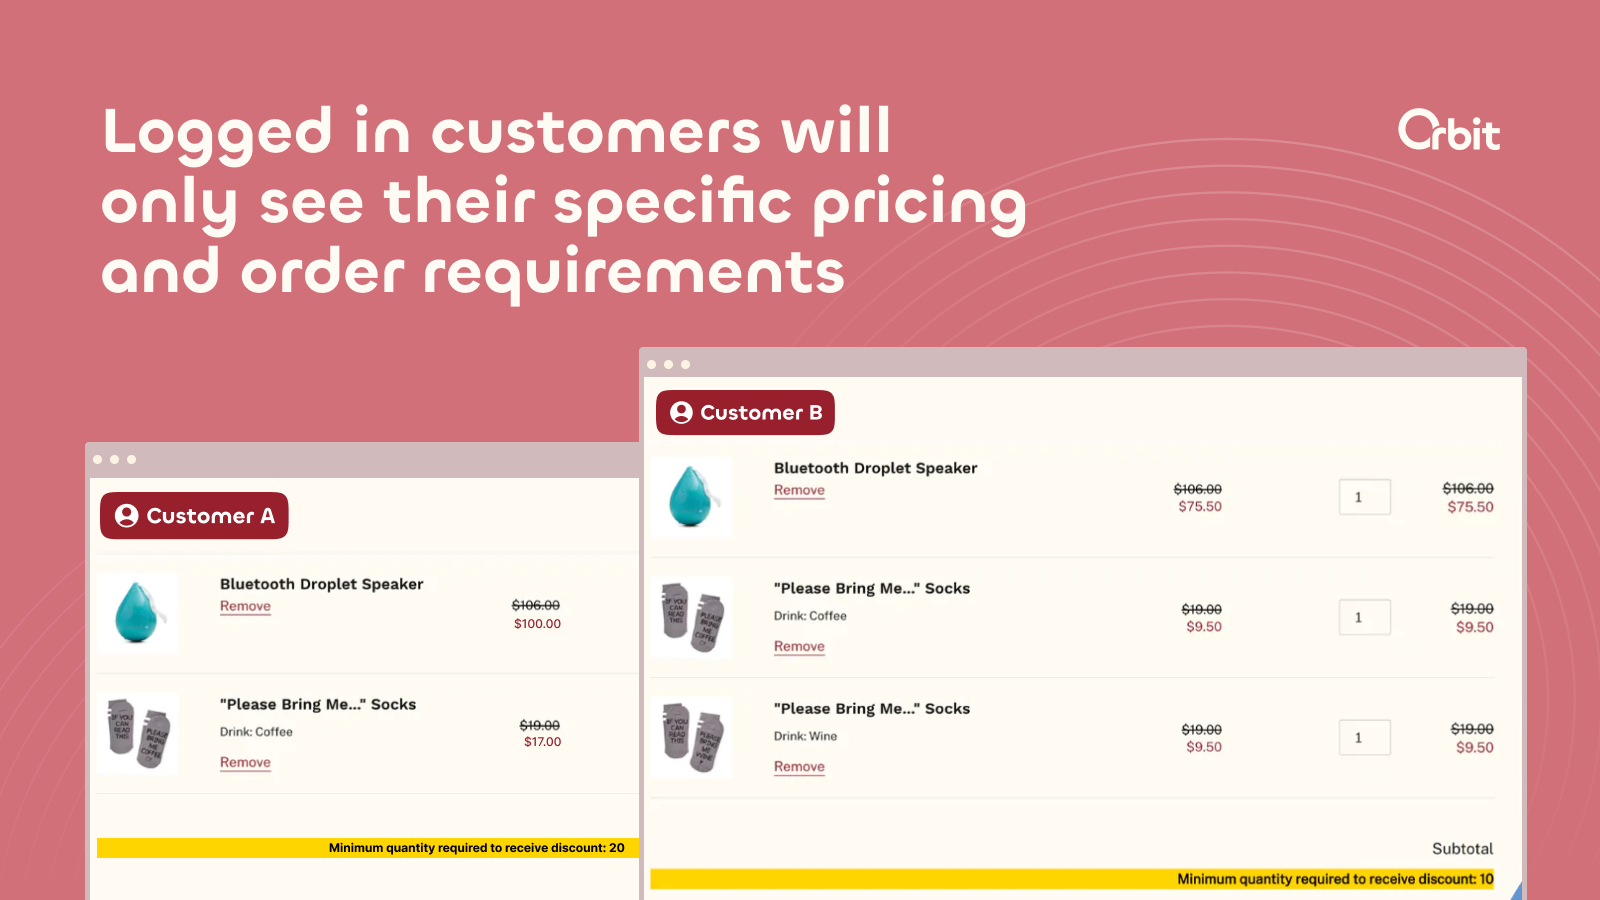 Logged in customers will only see their specific pricing.